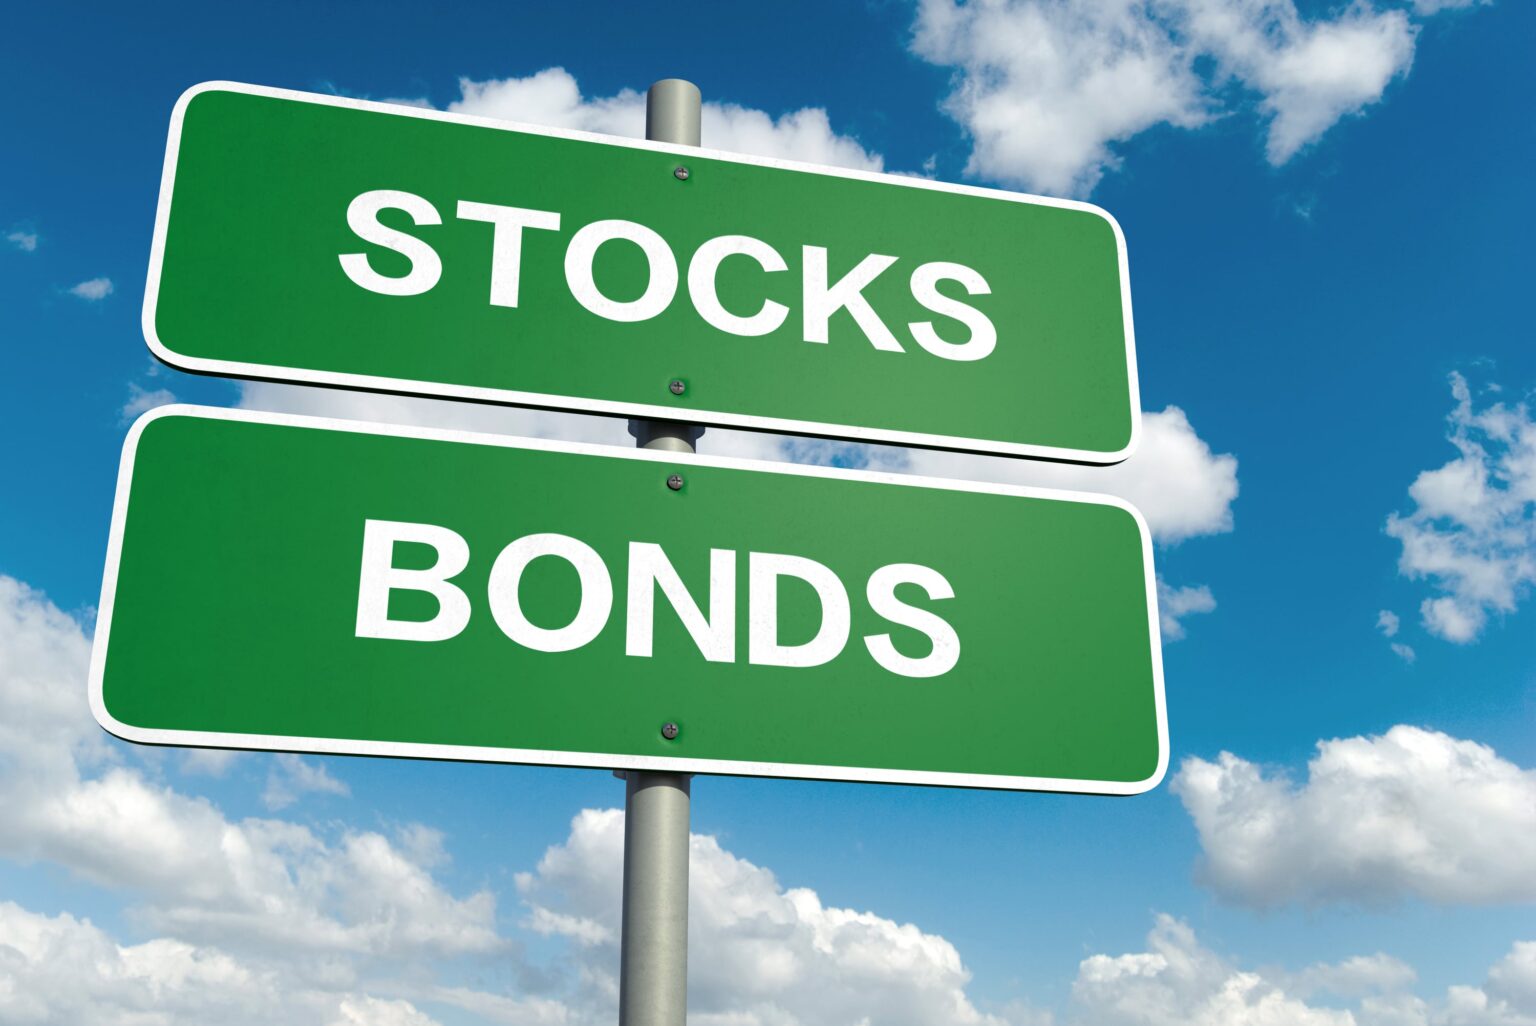 Stocks and bonds are a good source of income. Here are some tips on how to learn about them and how to invest.